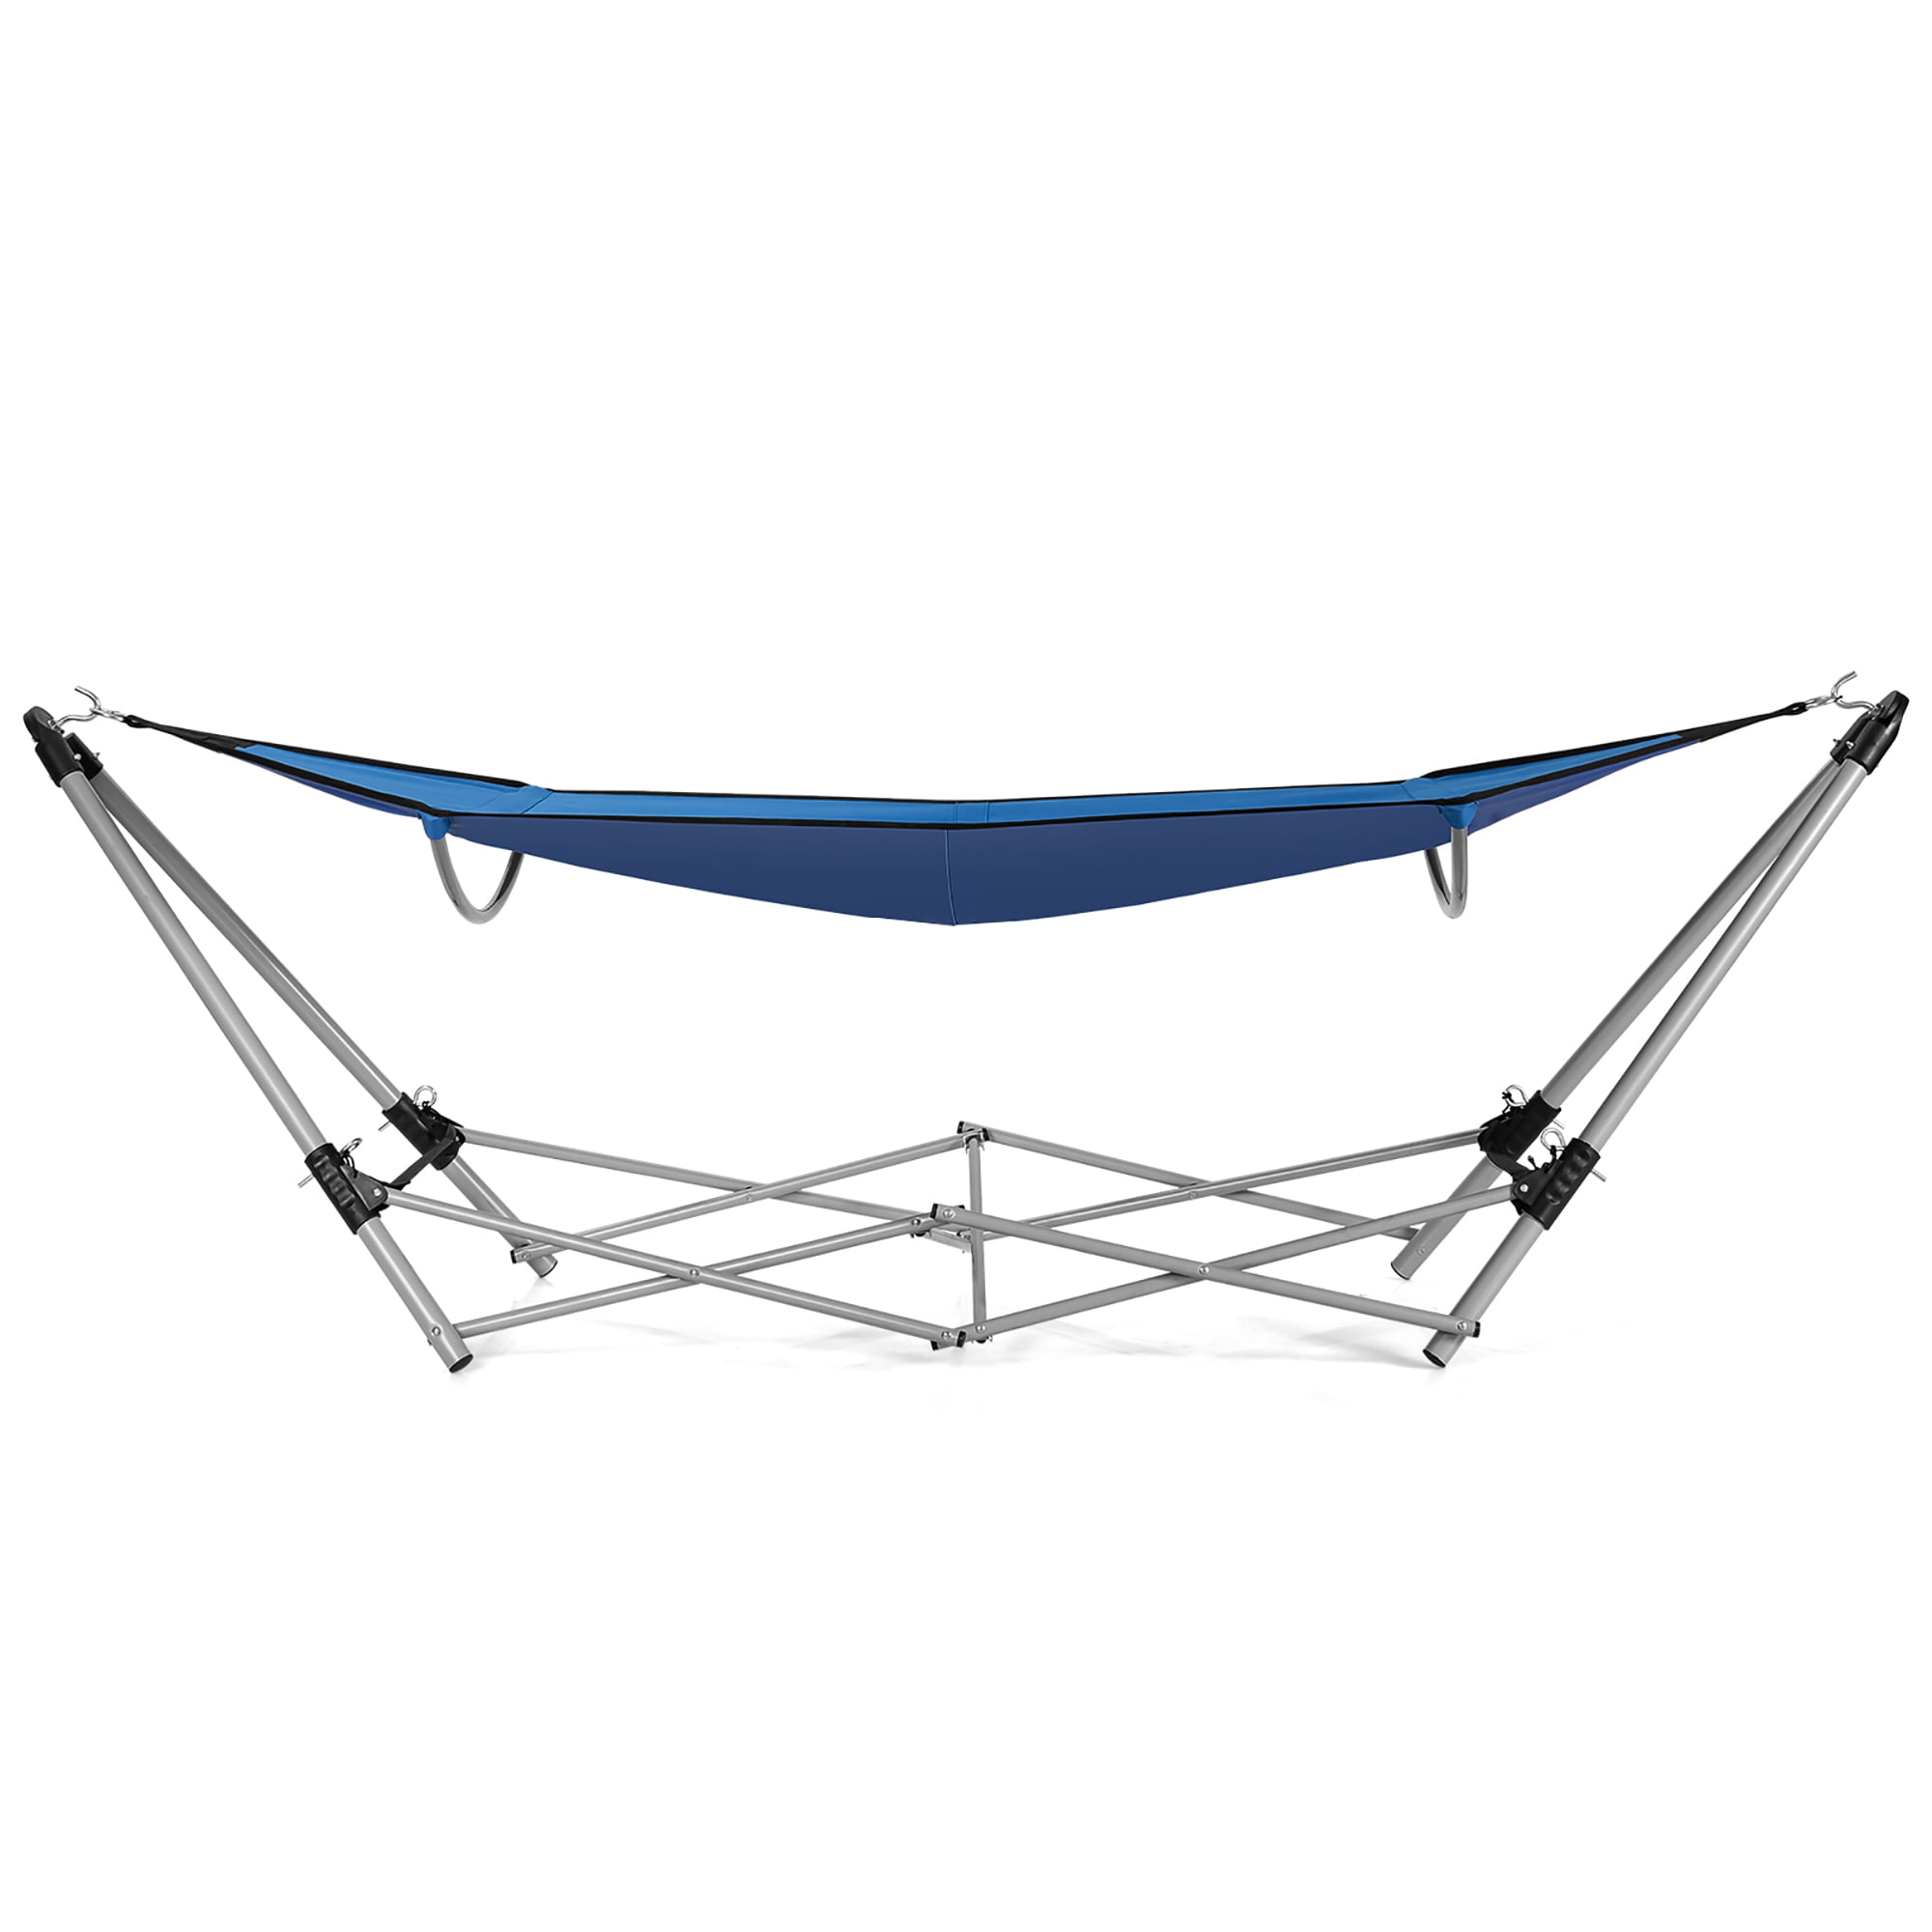 Costway Portable Folding Hammock Lounge Camping Bed Steel Frame